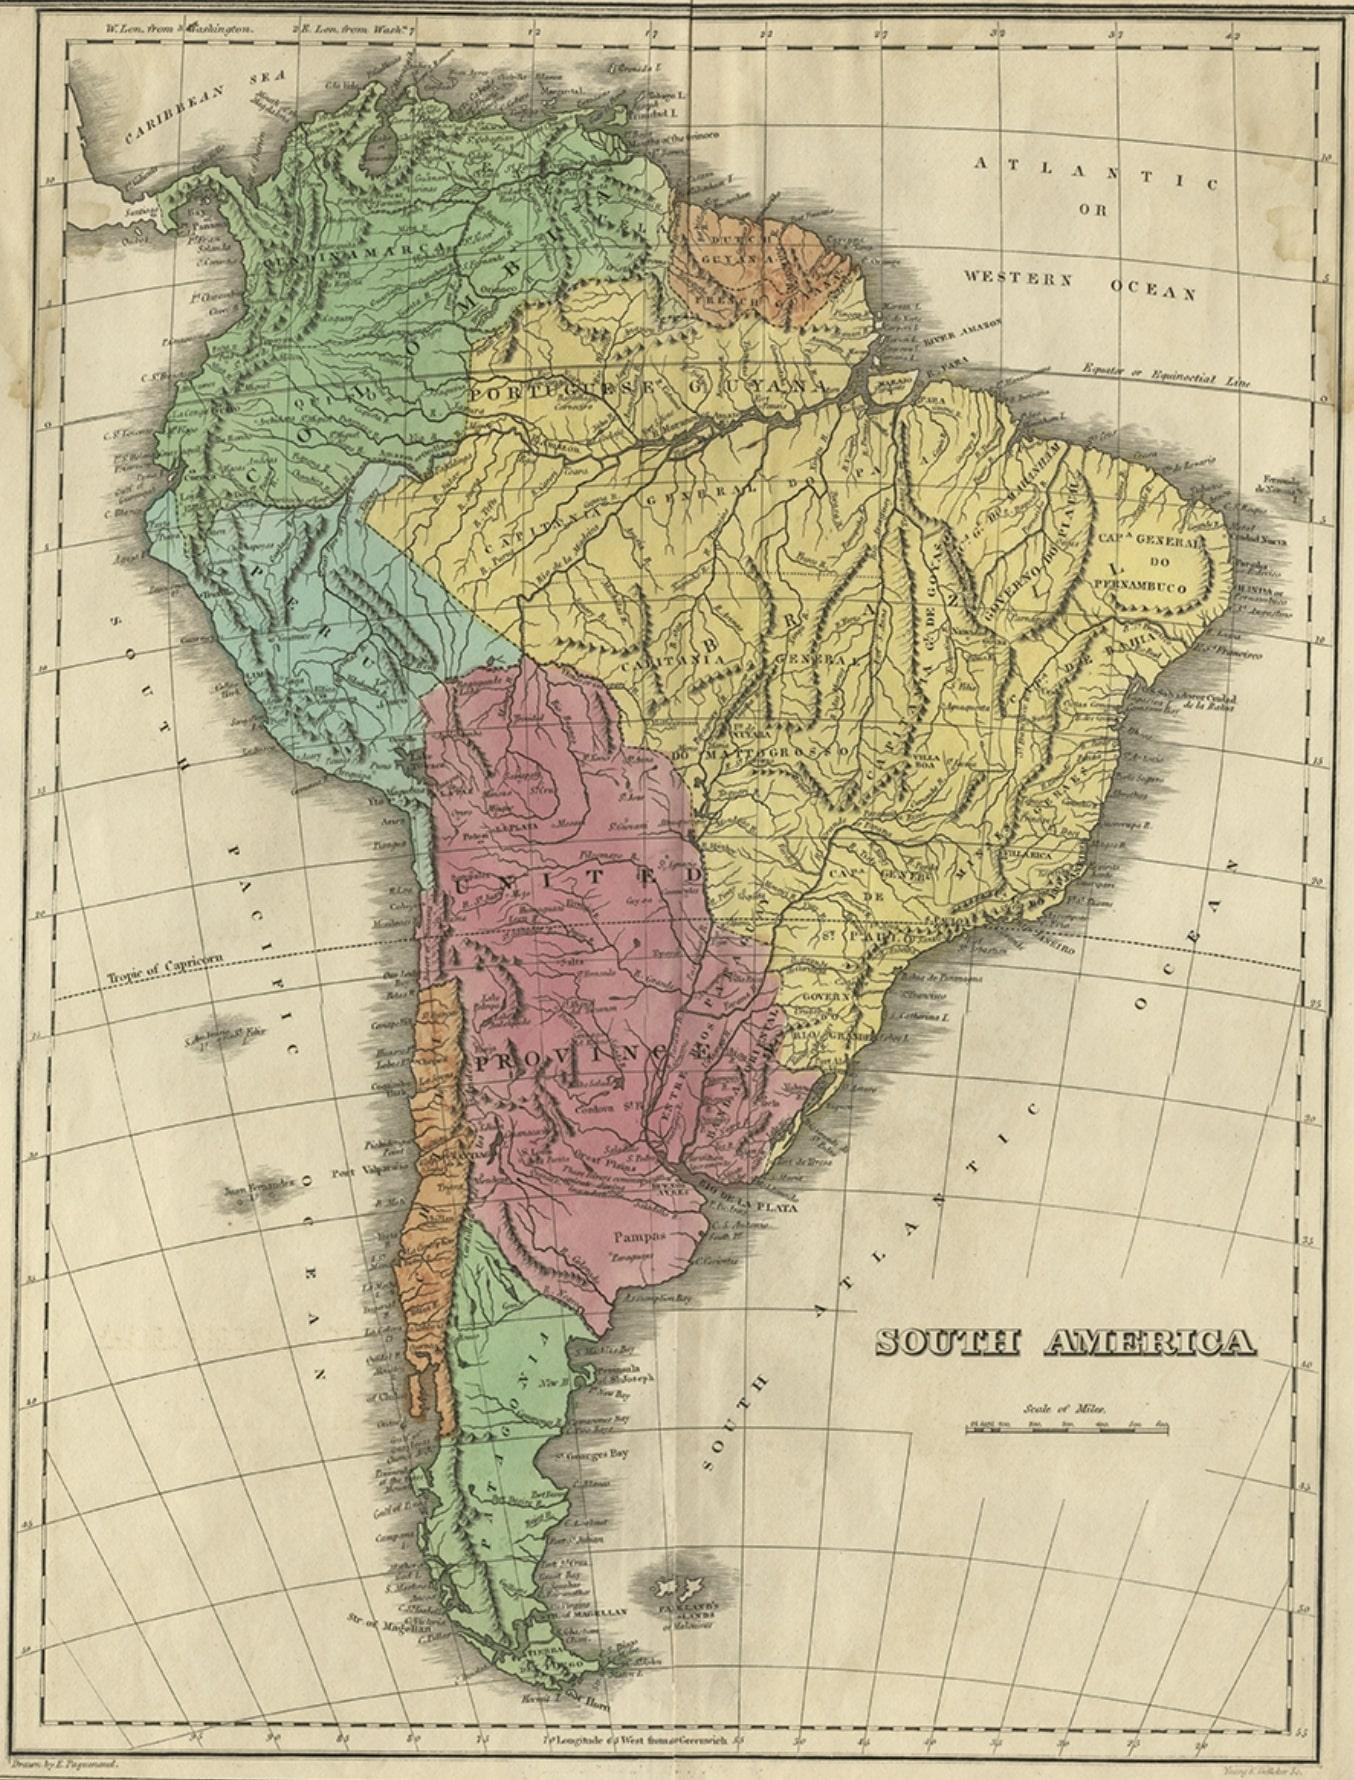 Antique map titled 'South America'. 

Map of South America with attractive topography, surrounded on three sides by text on the history, geography, and economy of the continent. Shows a huge La Plata province that includes much of Peru and all of